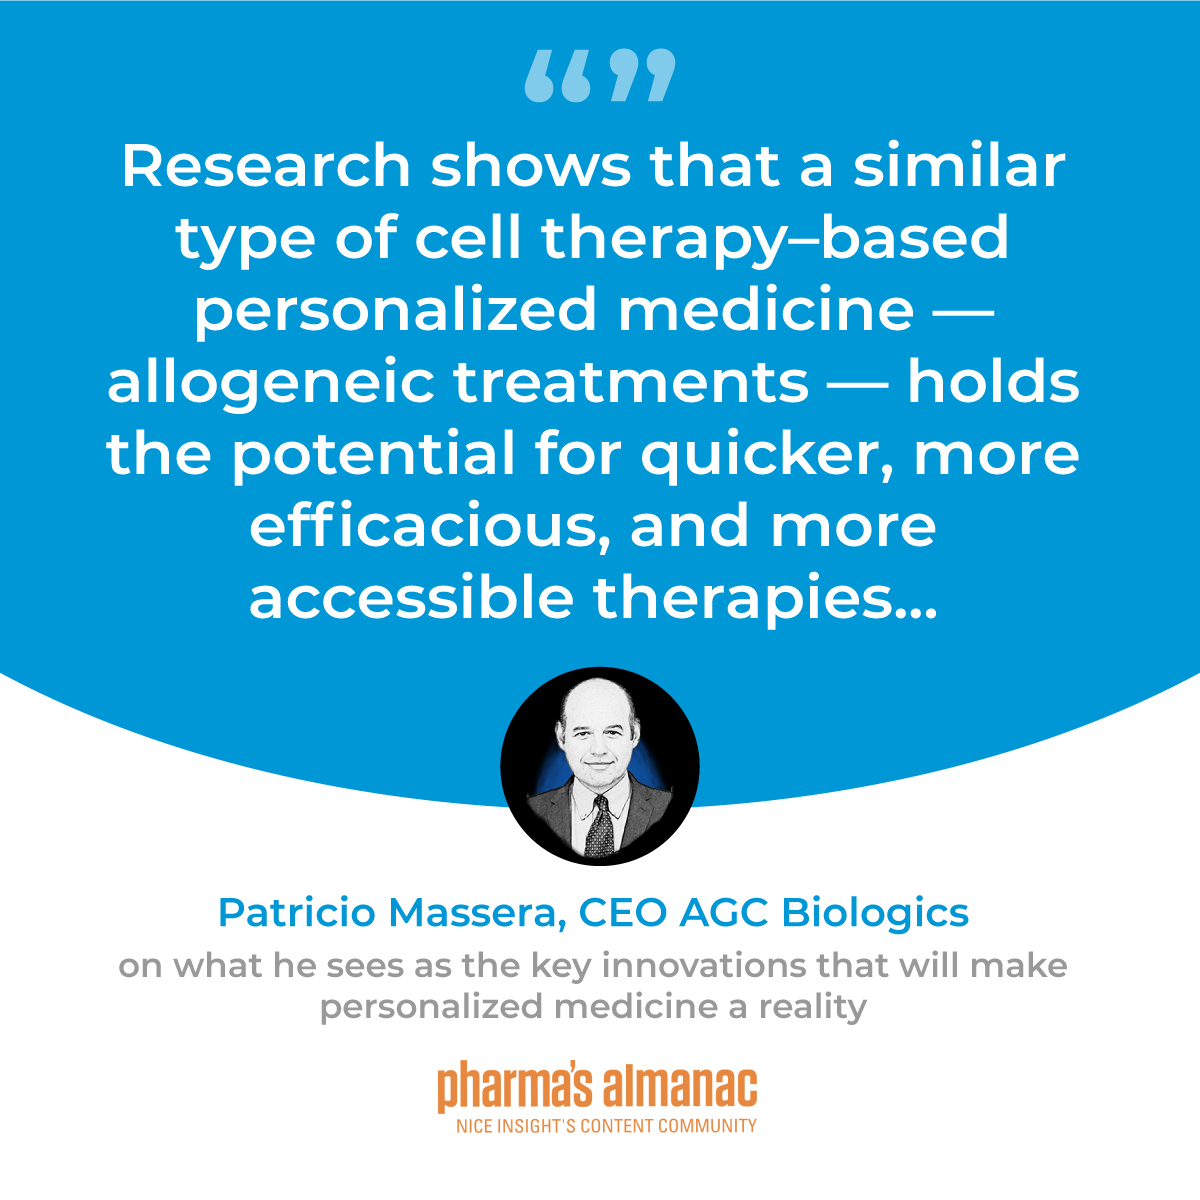 Patricio Massera quote: Research shows that a similar type cell therapy-based personalized medicine, allogenic treatments, holds the potential for quicker, more efficacious, and more accessible therapies